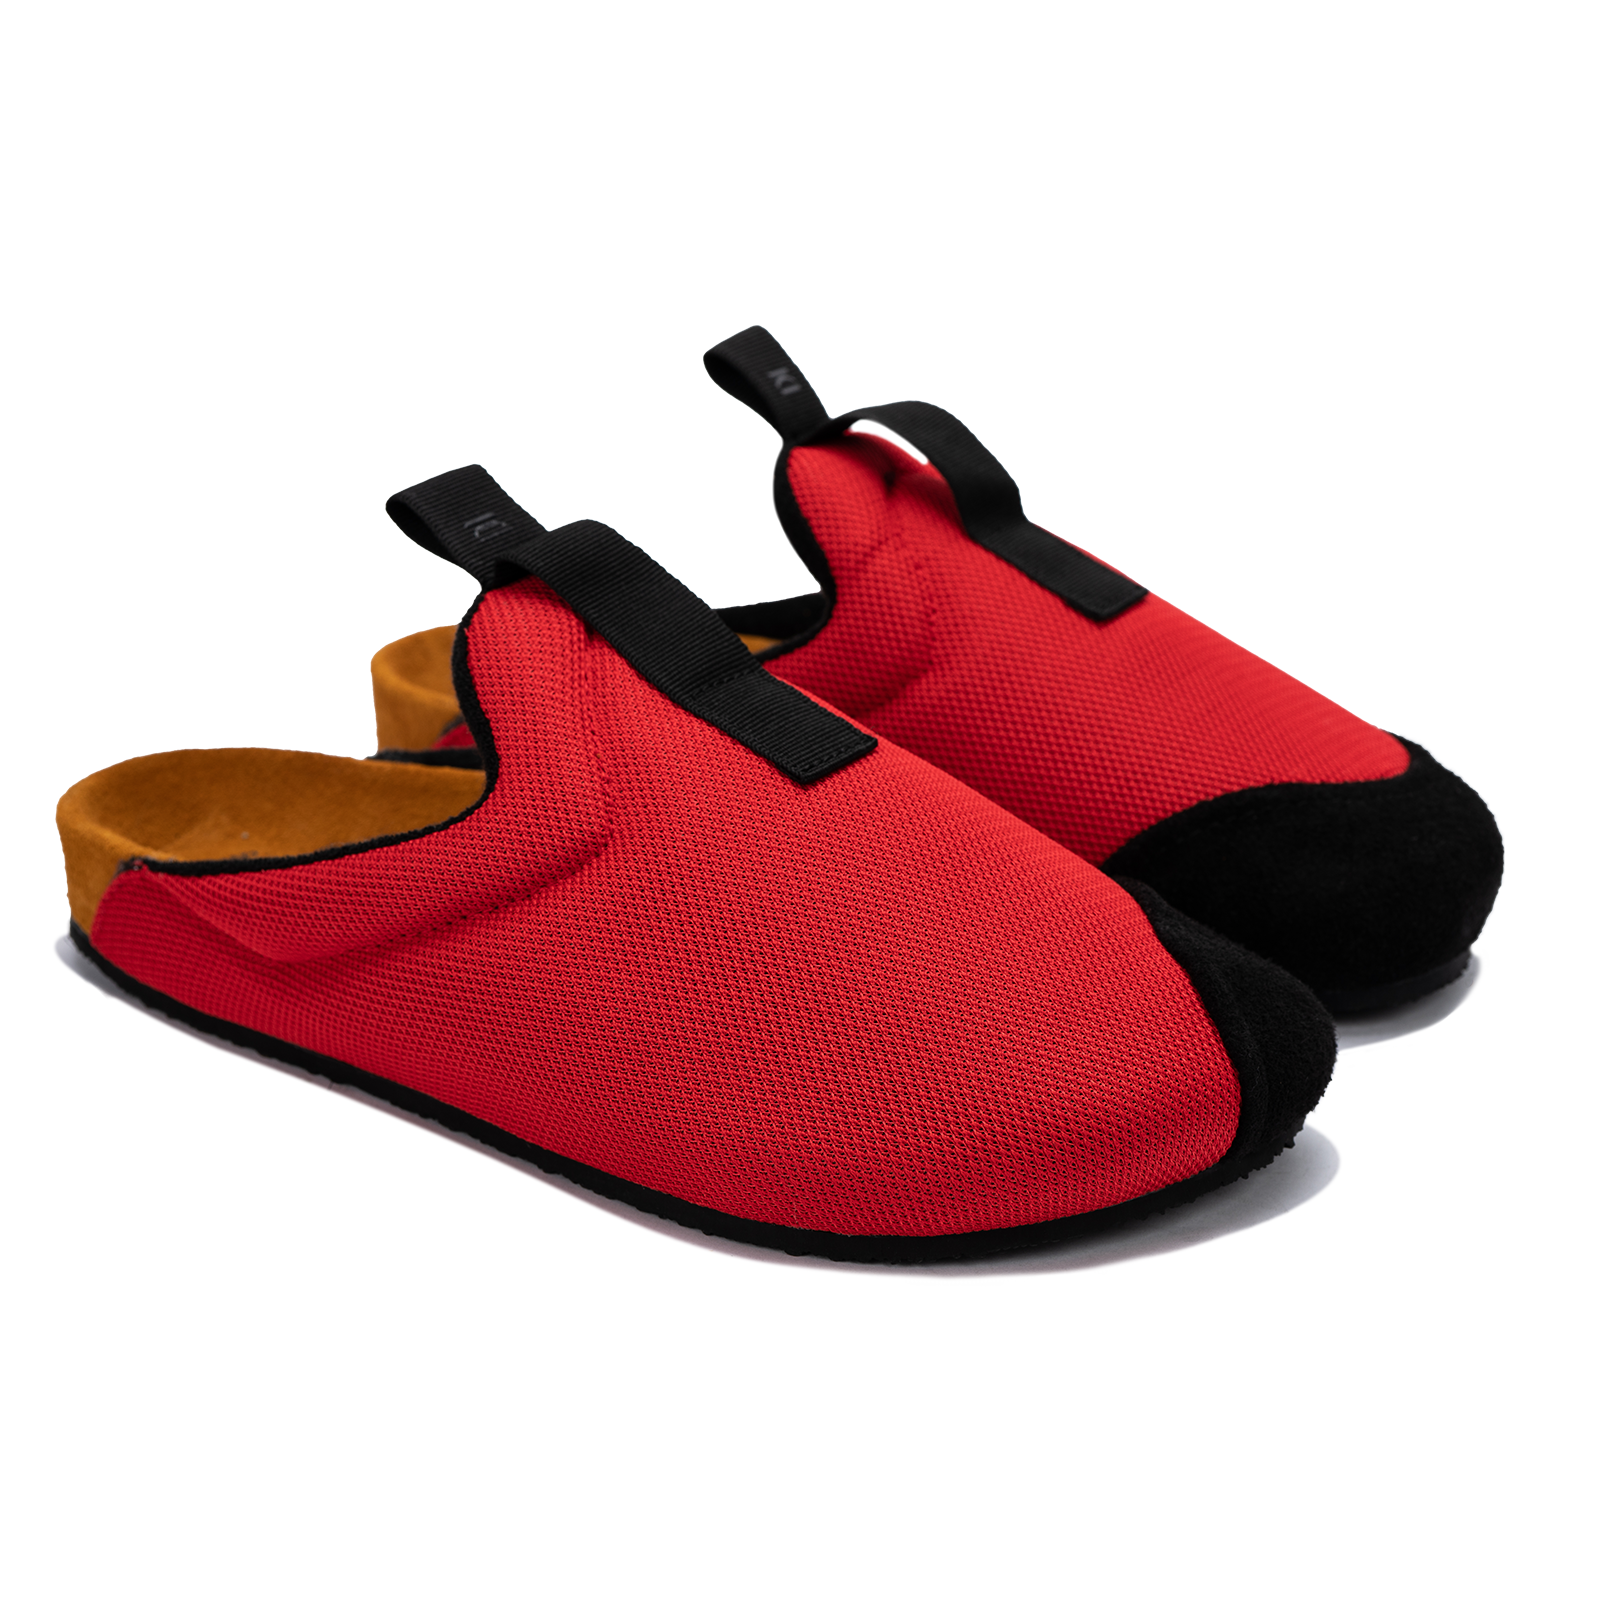 3/4 view antha 2.0 Red is a Mule made of red mesh with a Black hairy suede to overlay, cork midsole with suede top lining Black VIbram rubber bottom and woven top pull